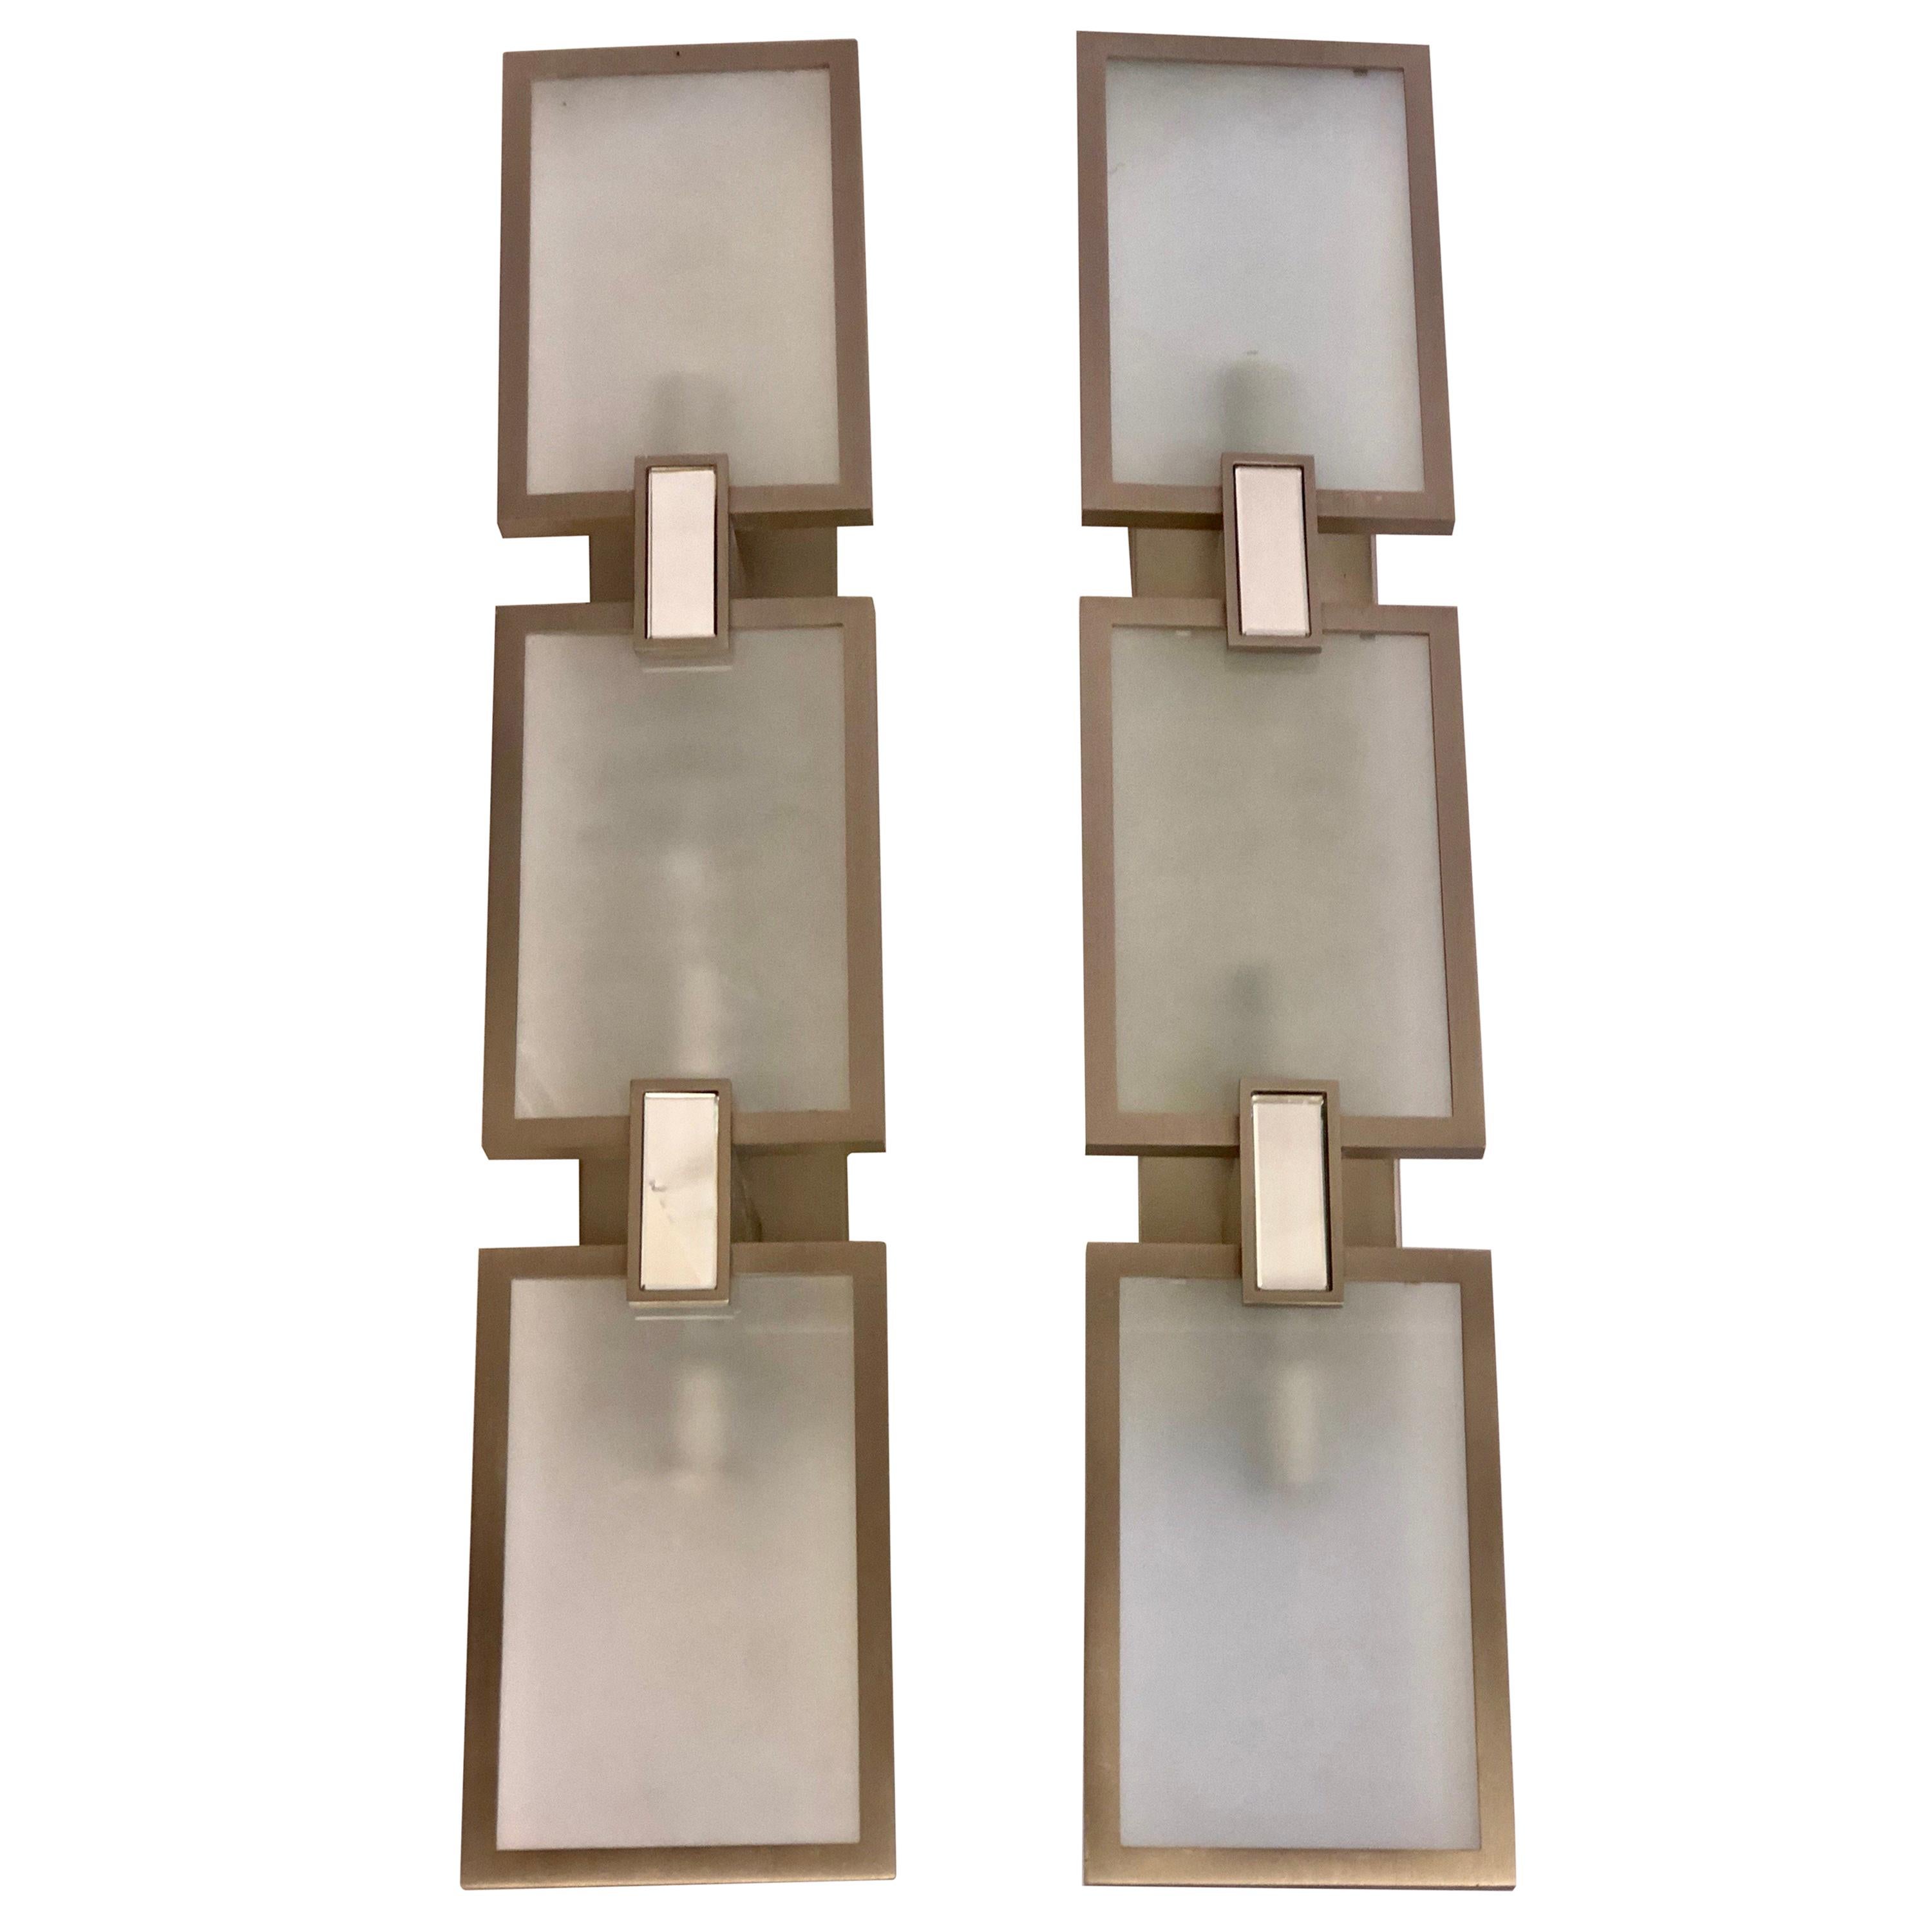 Pair of Italian Midcentury Style Nickel and Frosted Glass Sconces / Flush Mounts